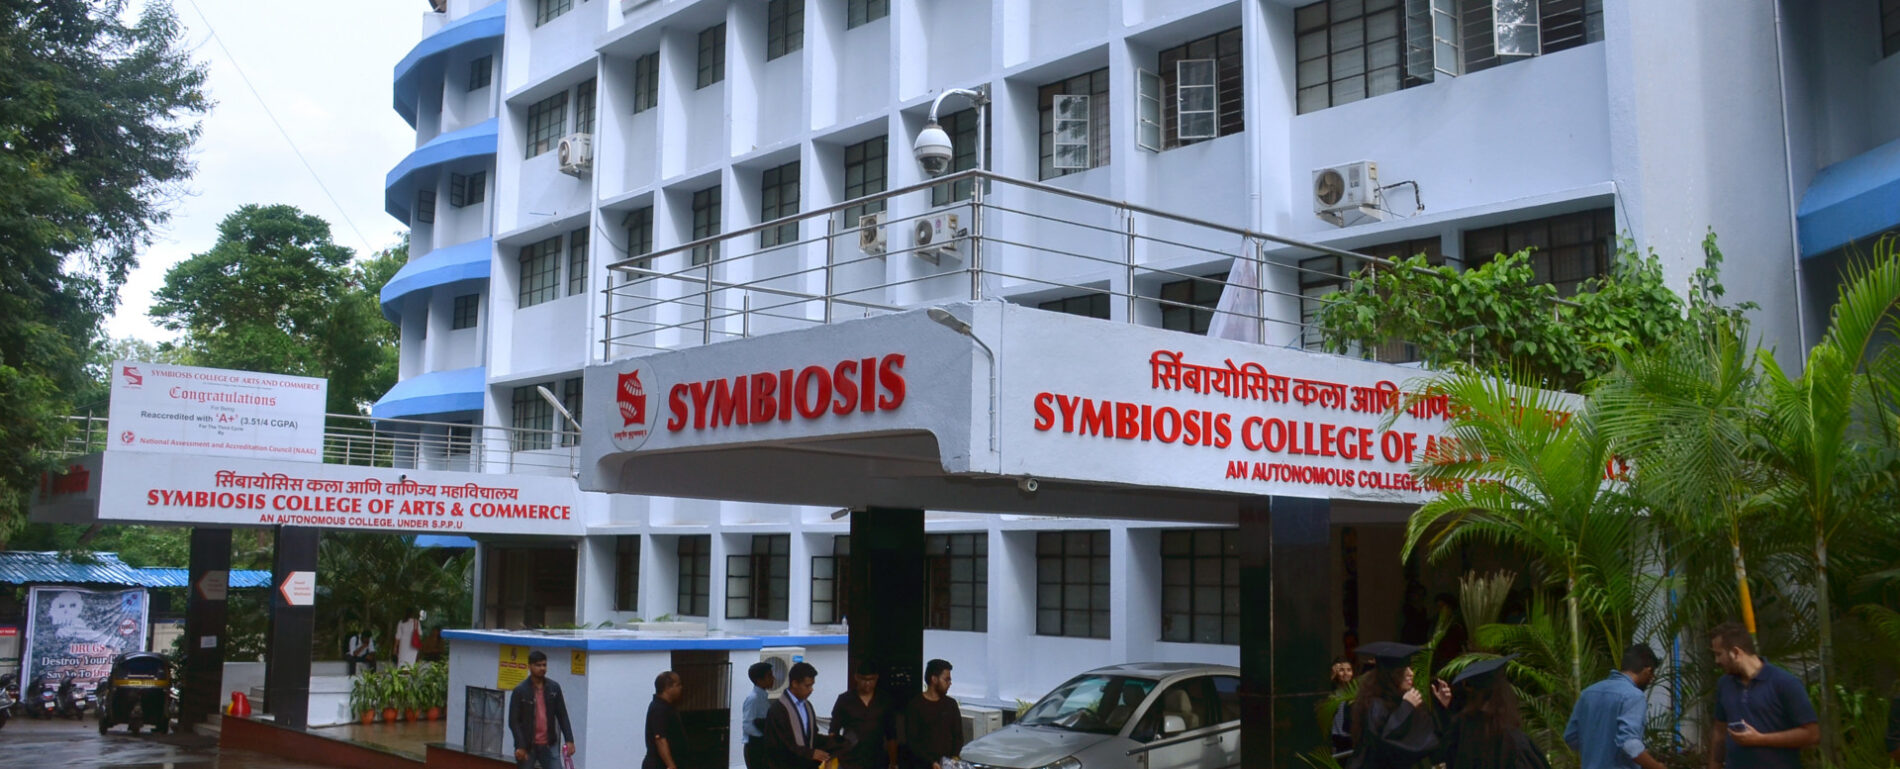 Symbiosis College of Arts and Commerce